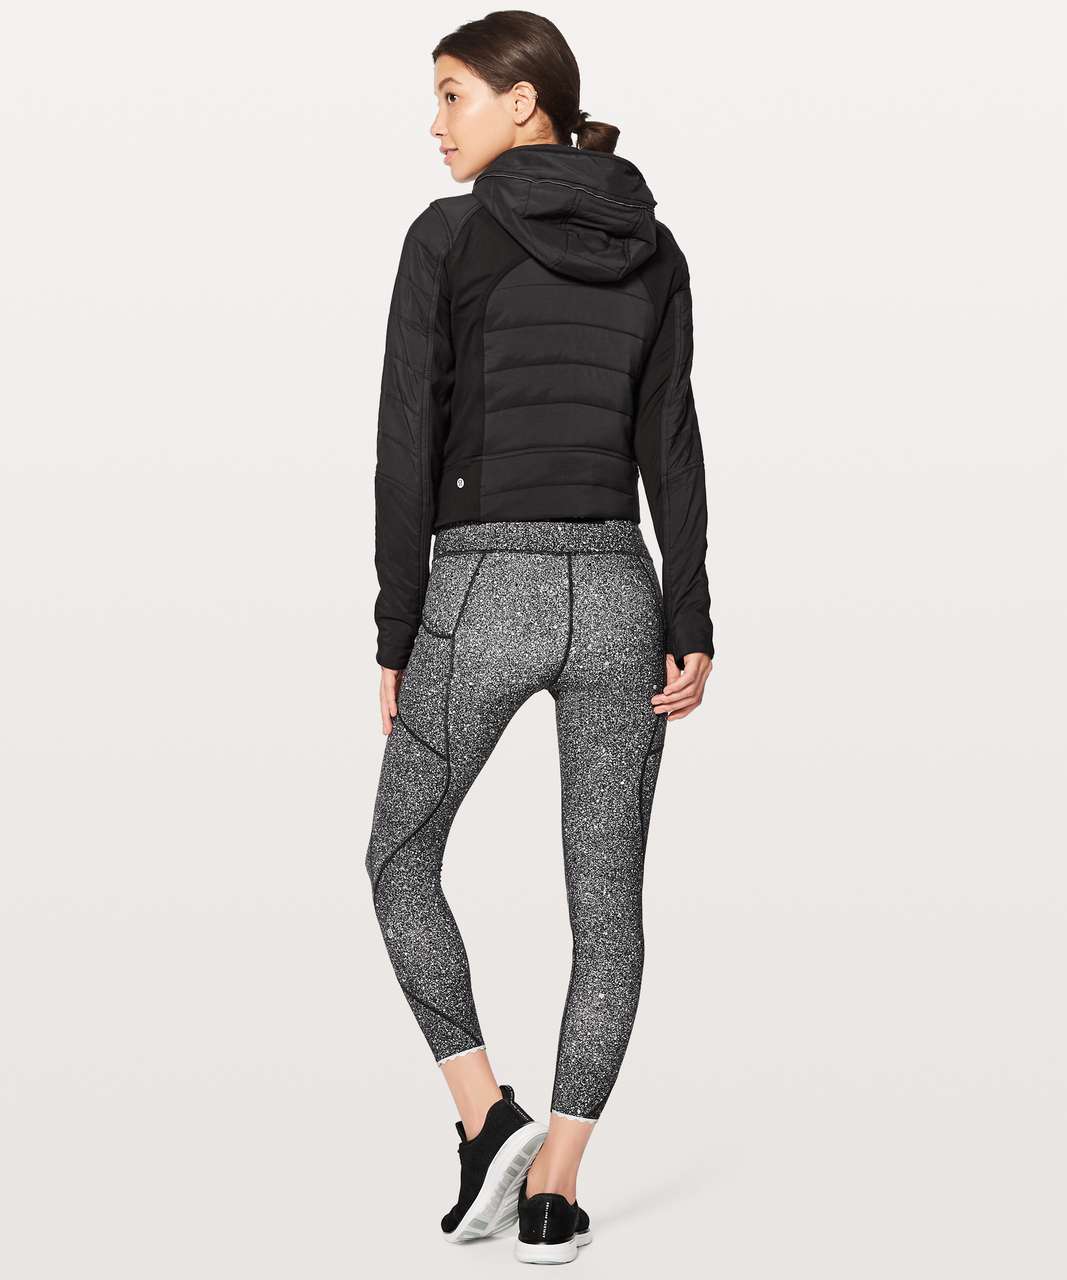 Lululemon Push Your Pace Jacket - Black (First Release)